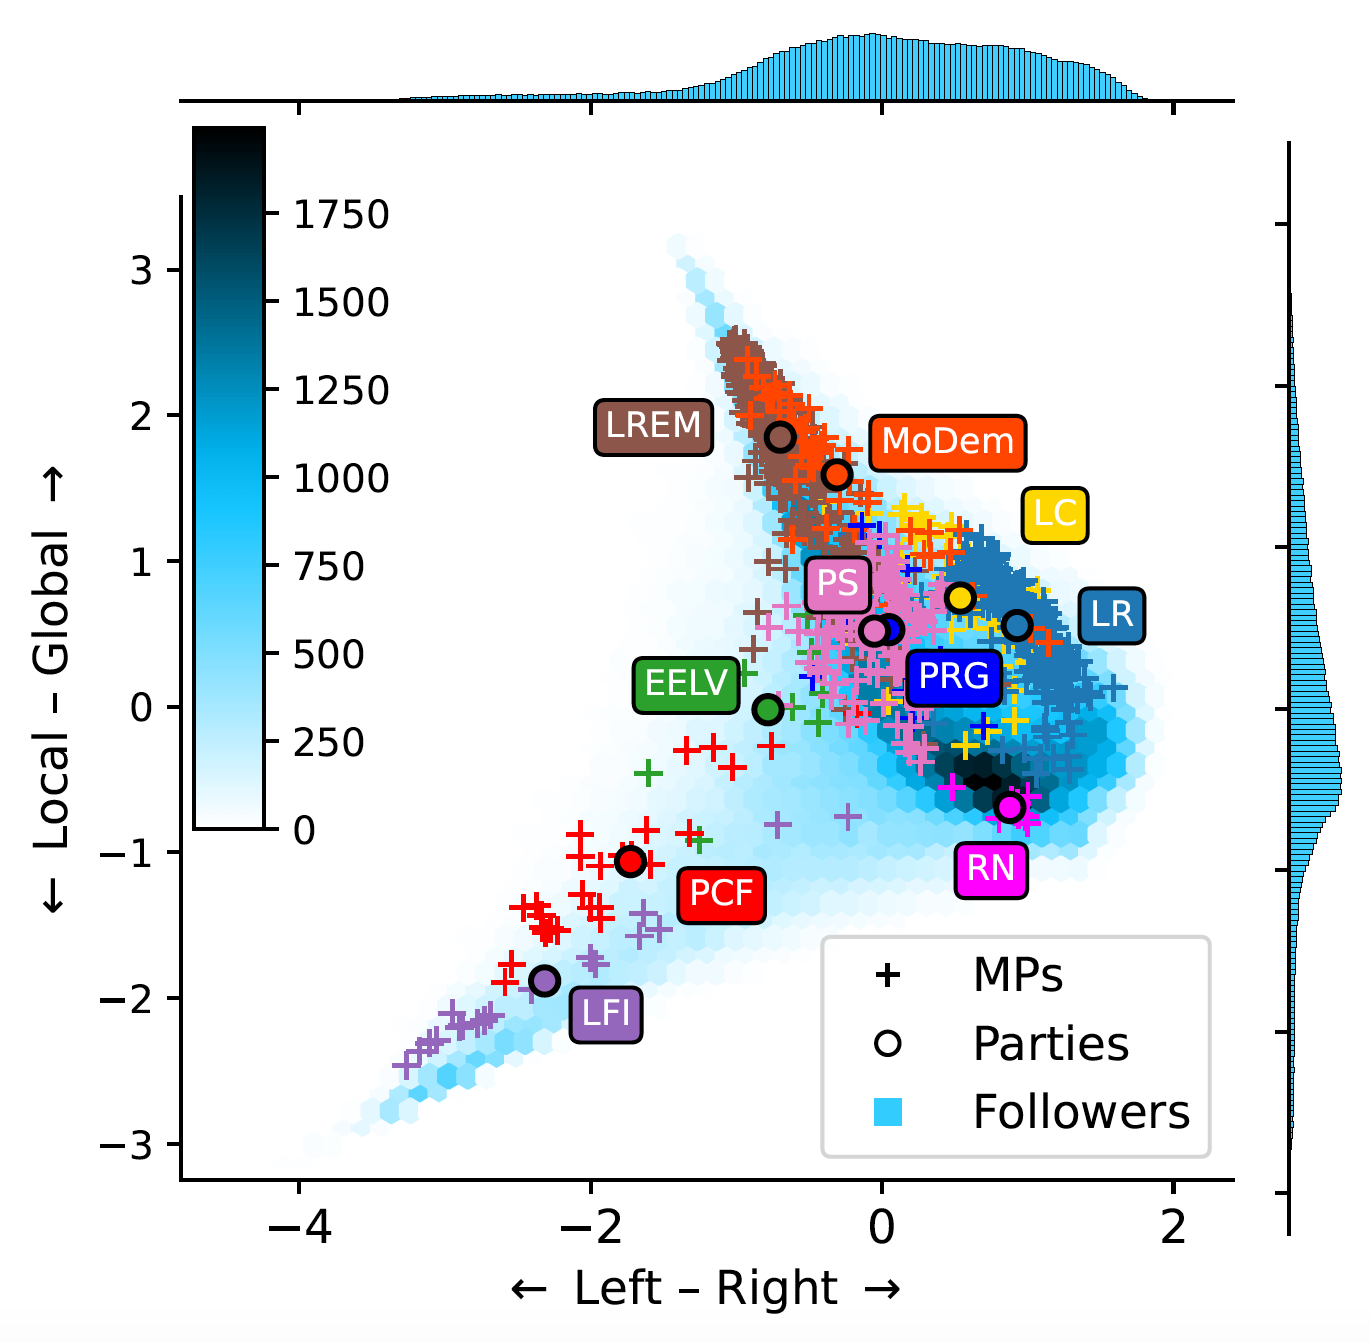 Legend : Embedding of users, politicians, and parties in latent ideological spaces computed from the French Twitter network. Ideological spatialization provides new means for measuring multi-polar and multi-issue polarisation.